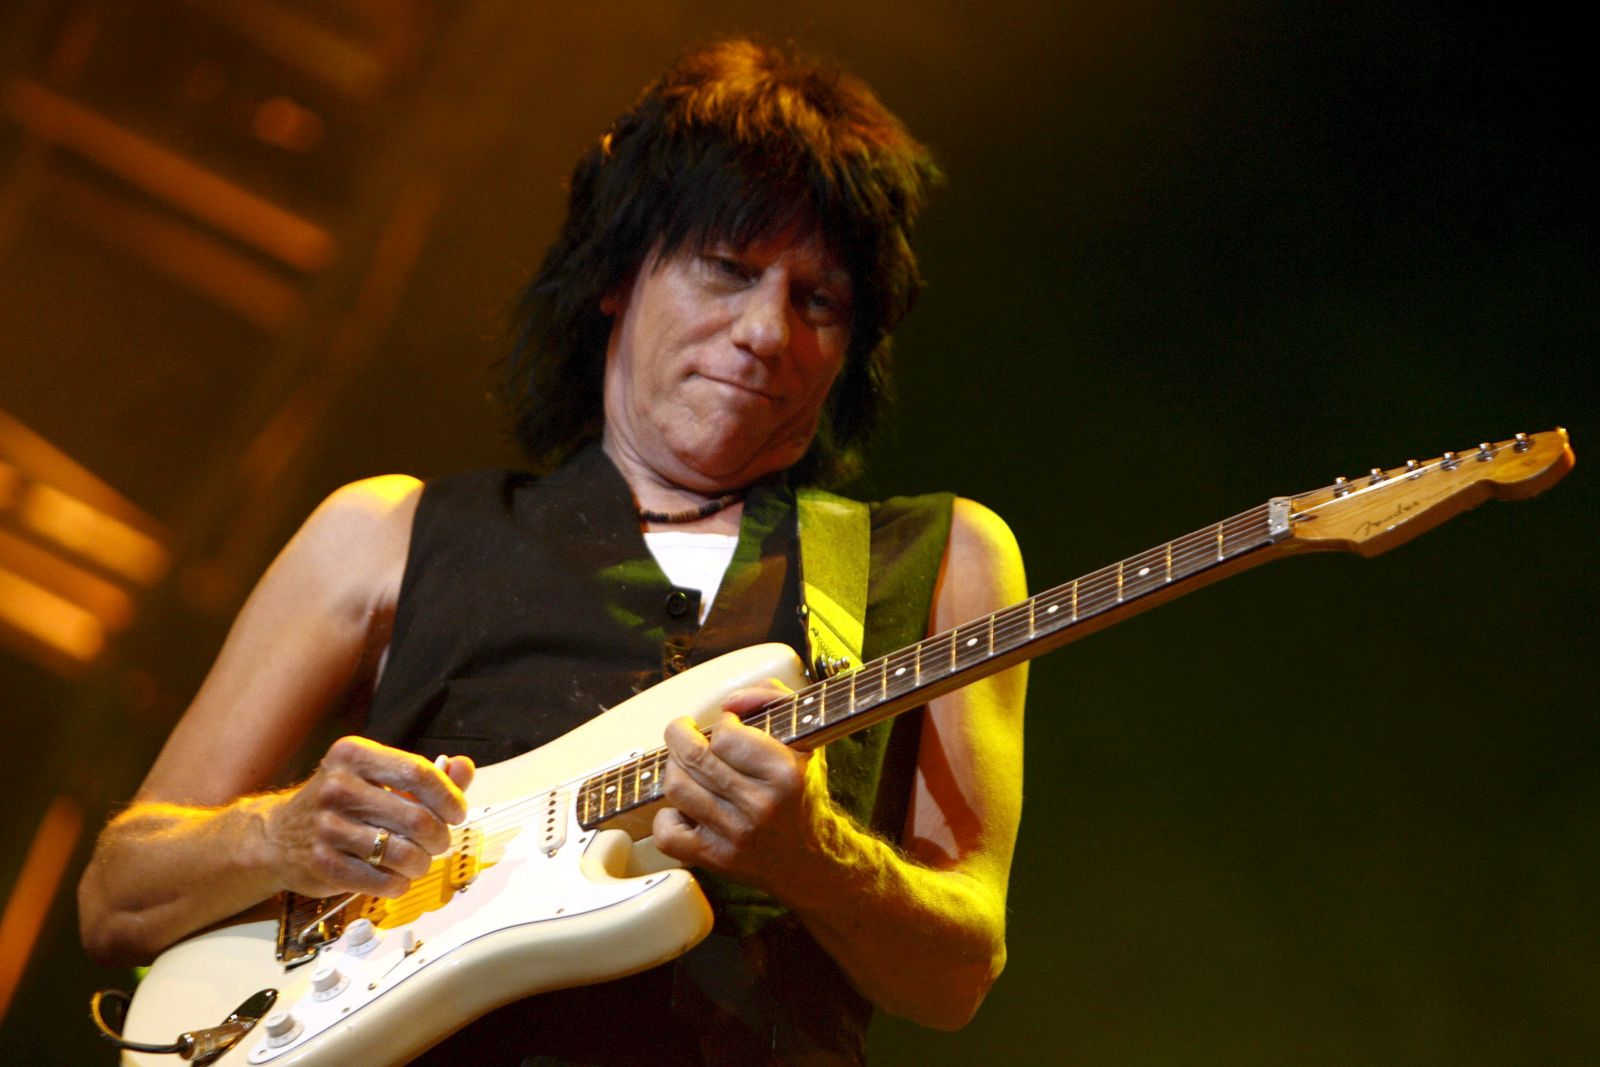 epa10400909 (FILE) - British guitarist Jeff Beck performs in the Stravinski hall during the 41st Montreux Jazz Festival in Montreux, Switzerland, 15 July 2007 (reissued 12 January 2023). Legendary British guitarist Jeff Beck has died on 10 January at the age of 78 after contracting bacterial meningitis, his family said in a statement on late 11 January 2023.  EPA/LAURENT GILLIERON